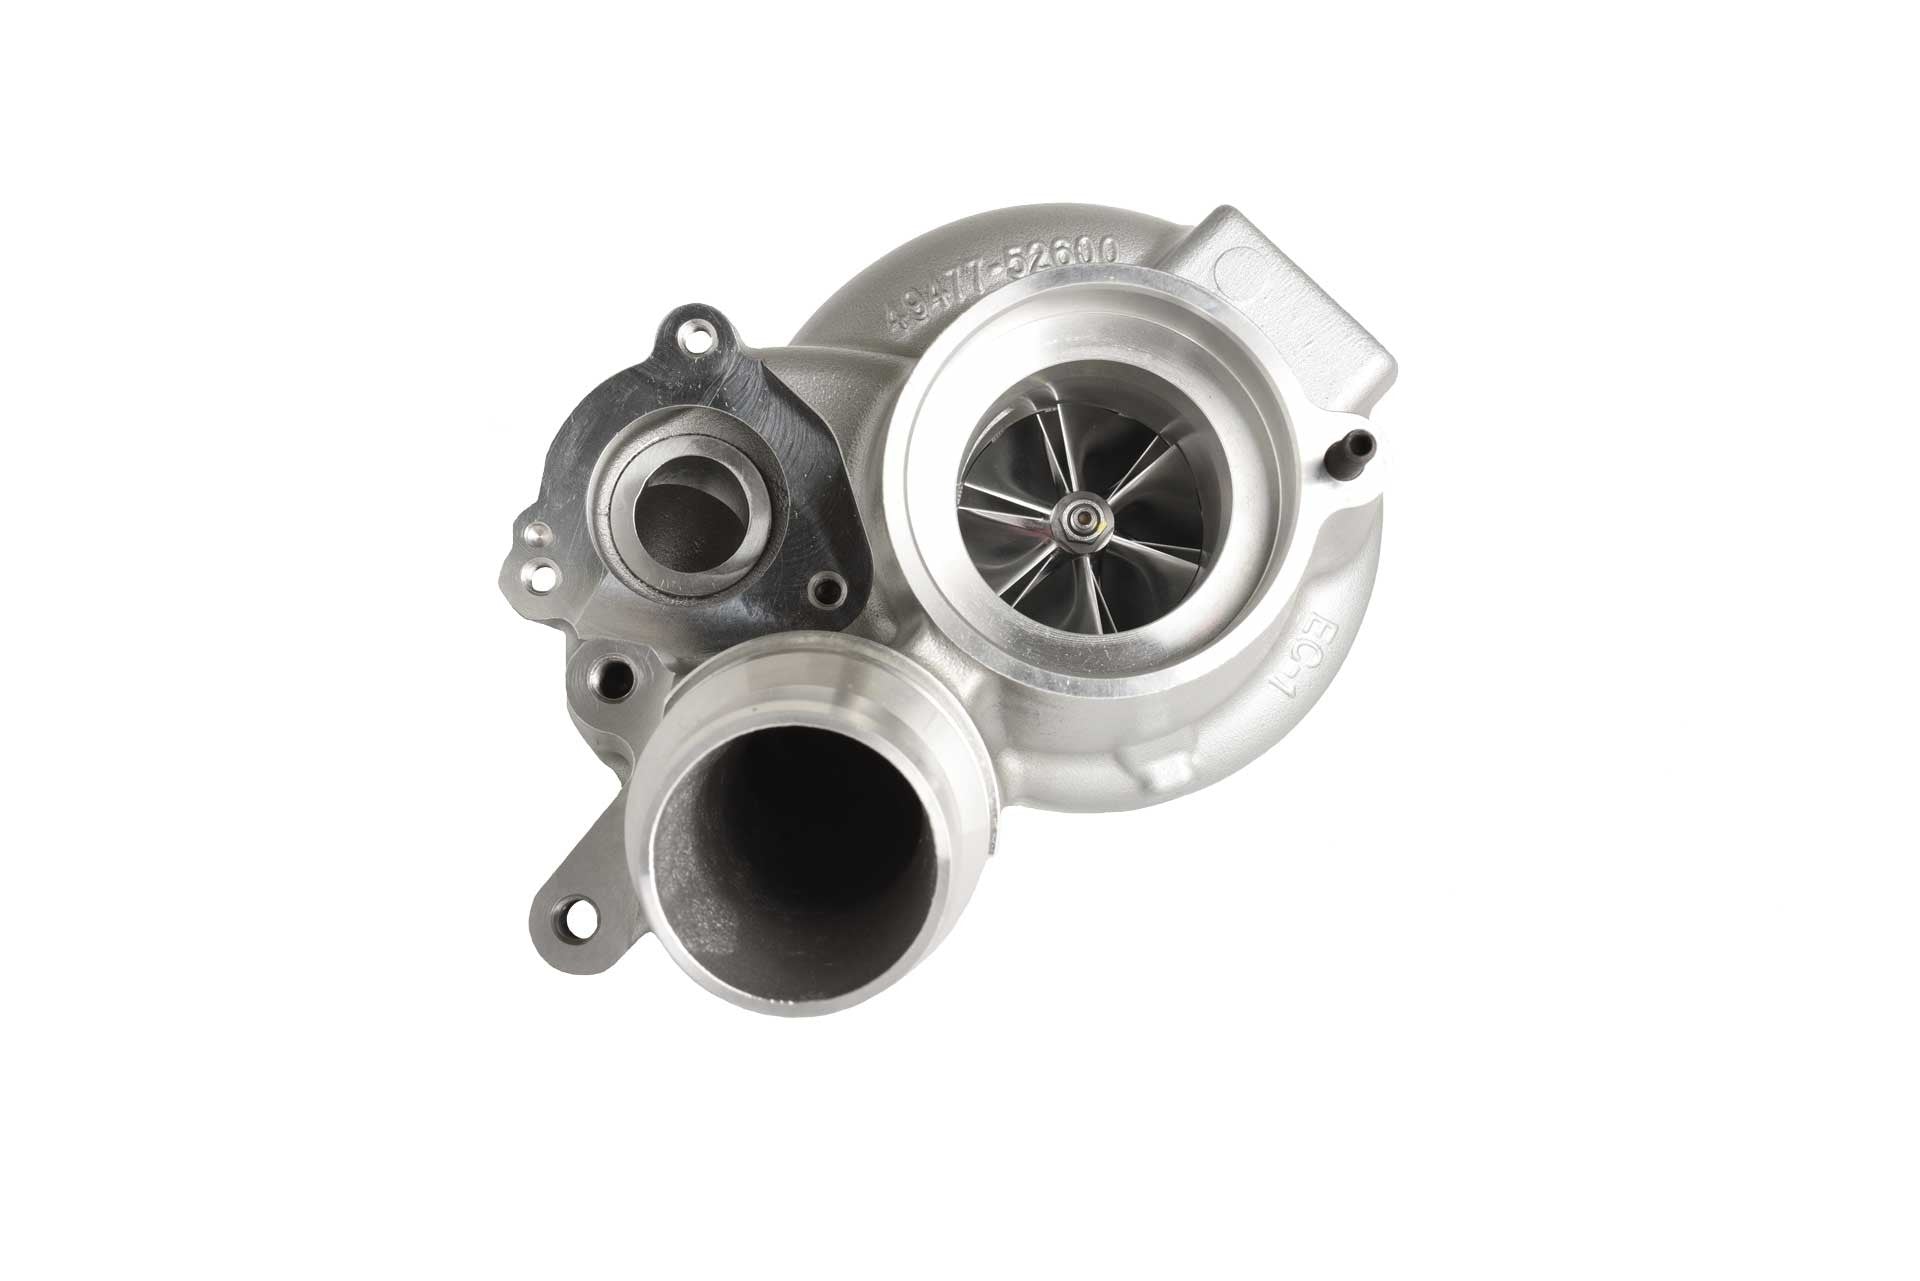 TR TW2000 Turbo (Pneumatic Wastegate) for BMW N20/N26 and Motul 300V Power & Competition